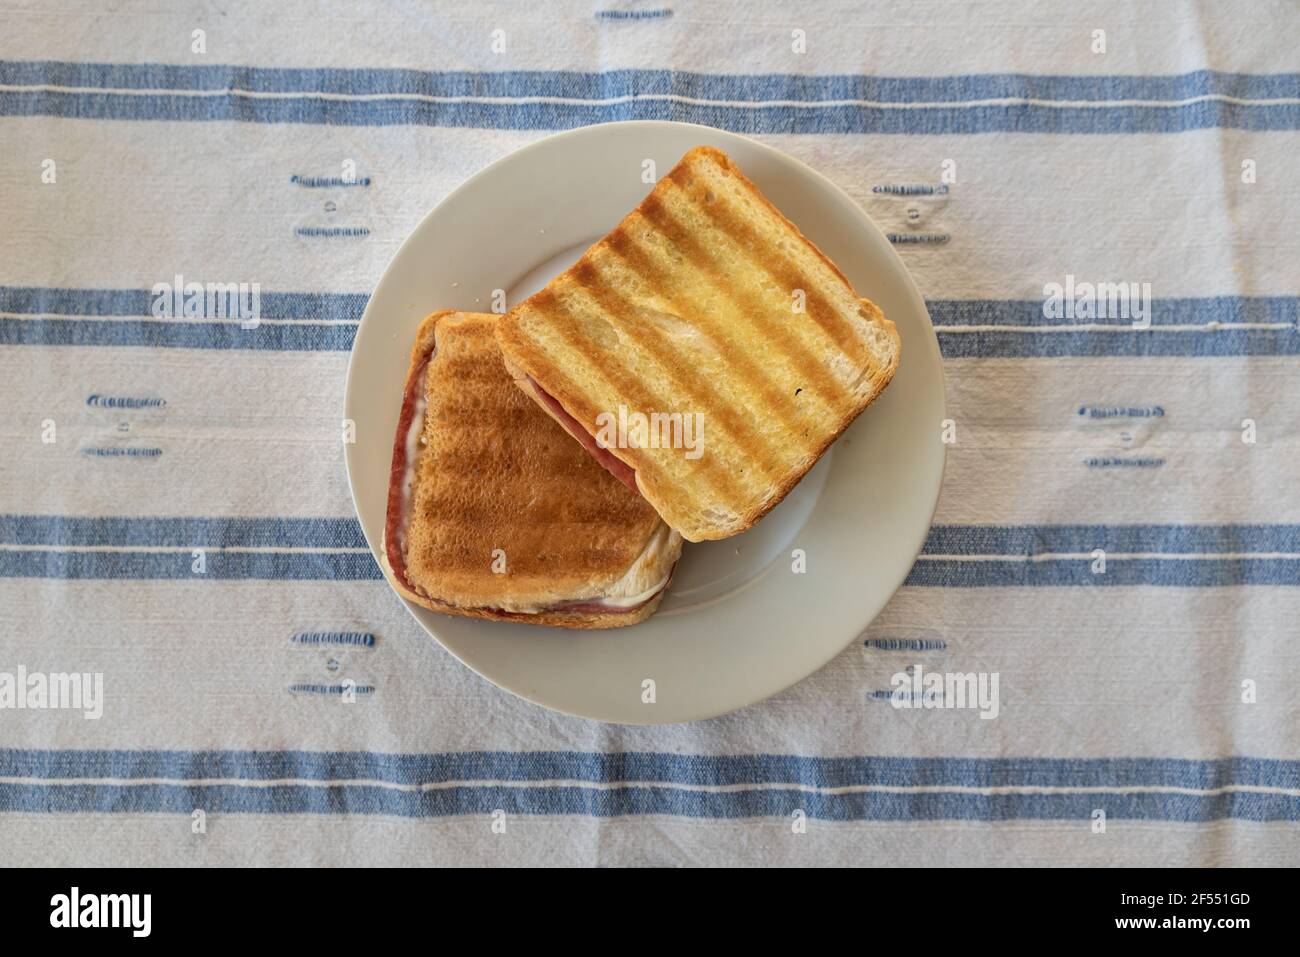 Toast is the favorable food of so many pople and several people have toast at breakfast Stock Photo